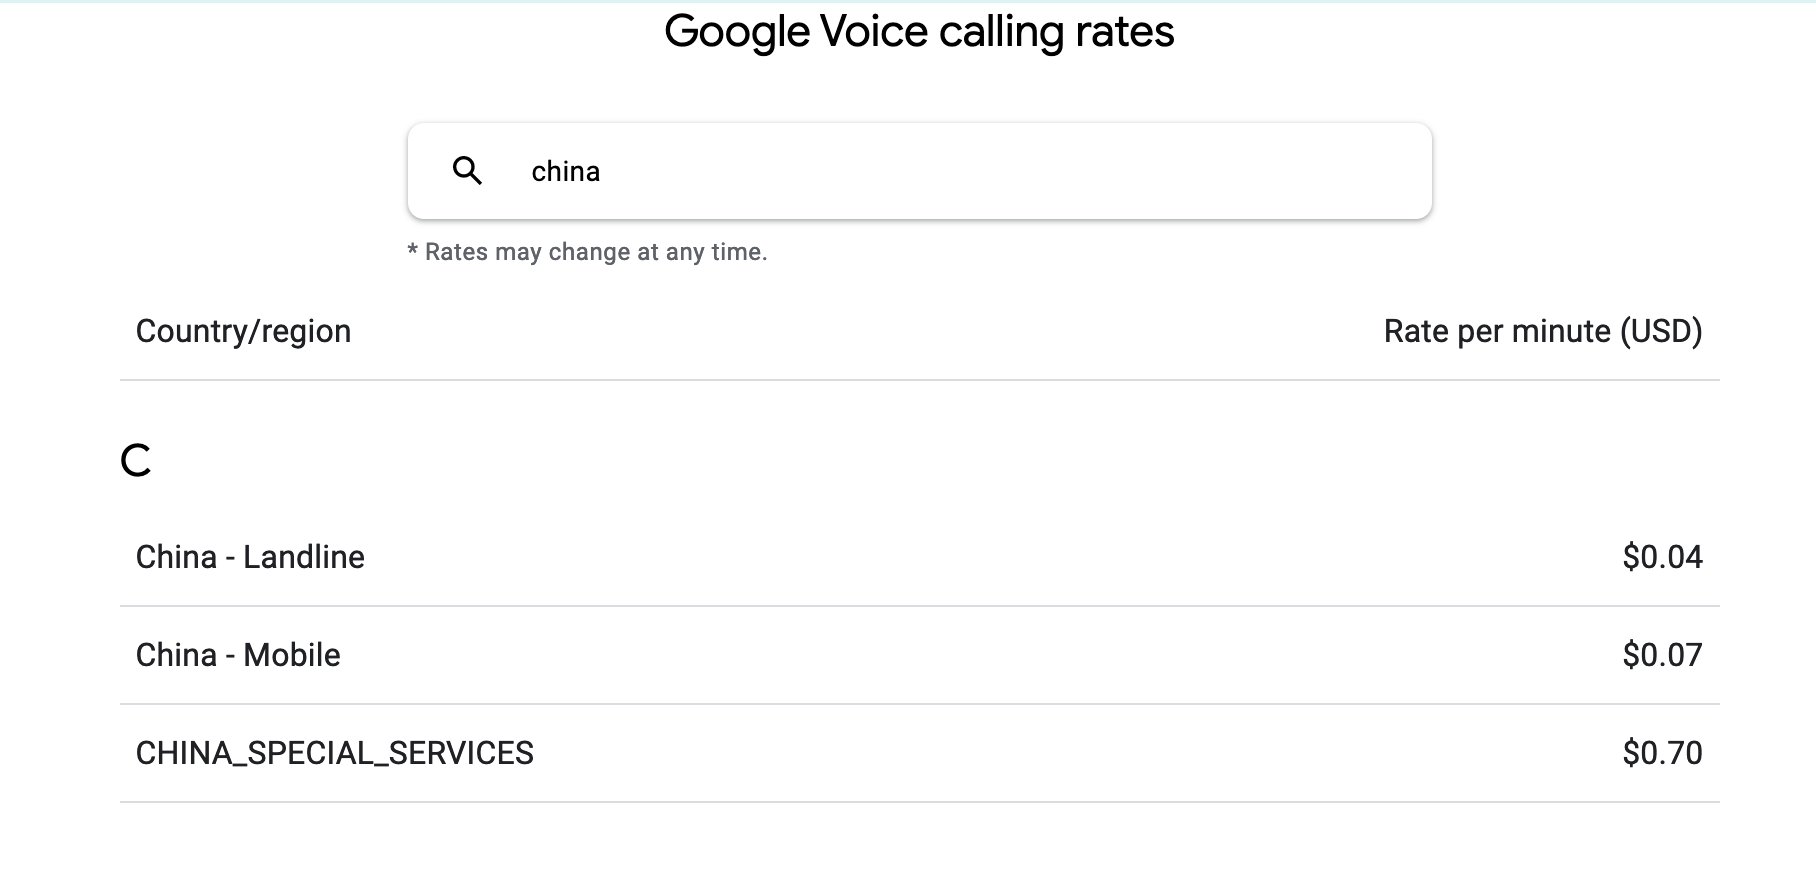 screenshot of Google Voice calling rates, calling a landline is $0.04/min, calling a mobile device is $0.07/min, and CHINA_SPECIAL_SERVICES is $0.70/min